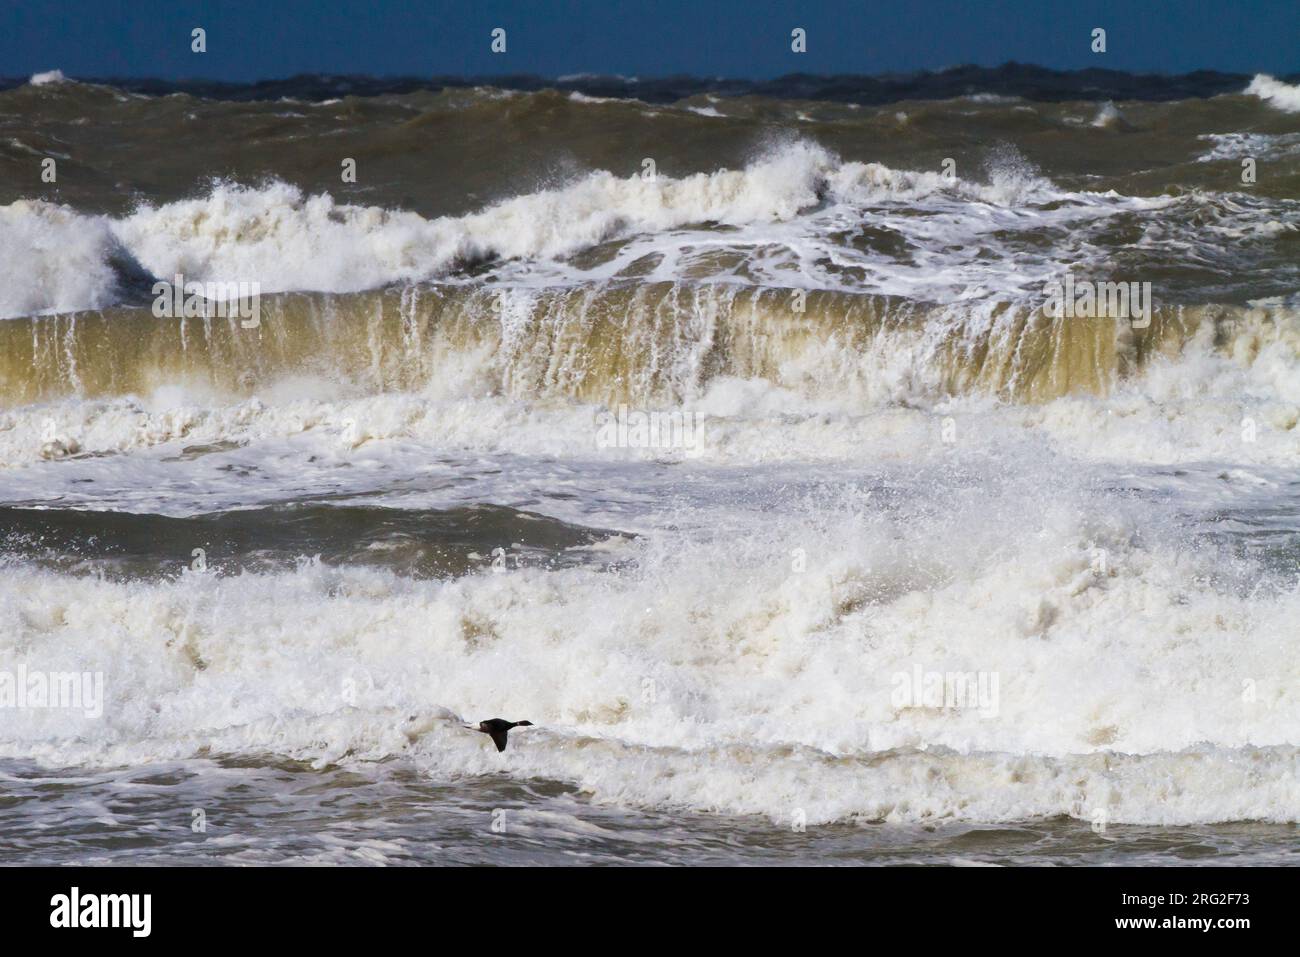 Rotgans, Dark-bellied Brent Goose, Branta bernicla flying in fron of breaking surf with big waves of the north sea on spring migration Stock Photo